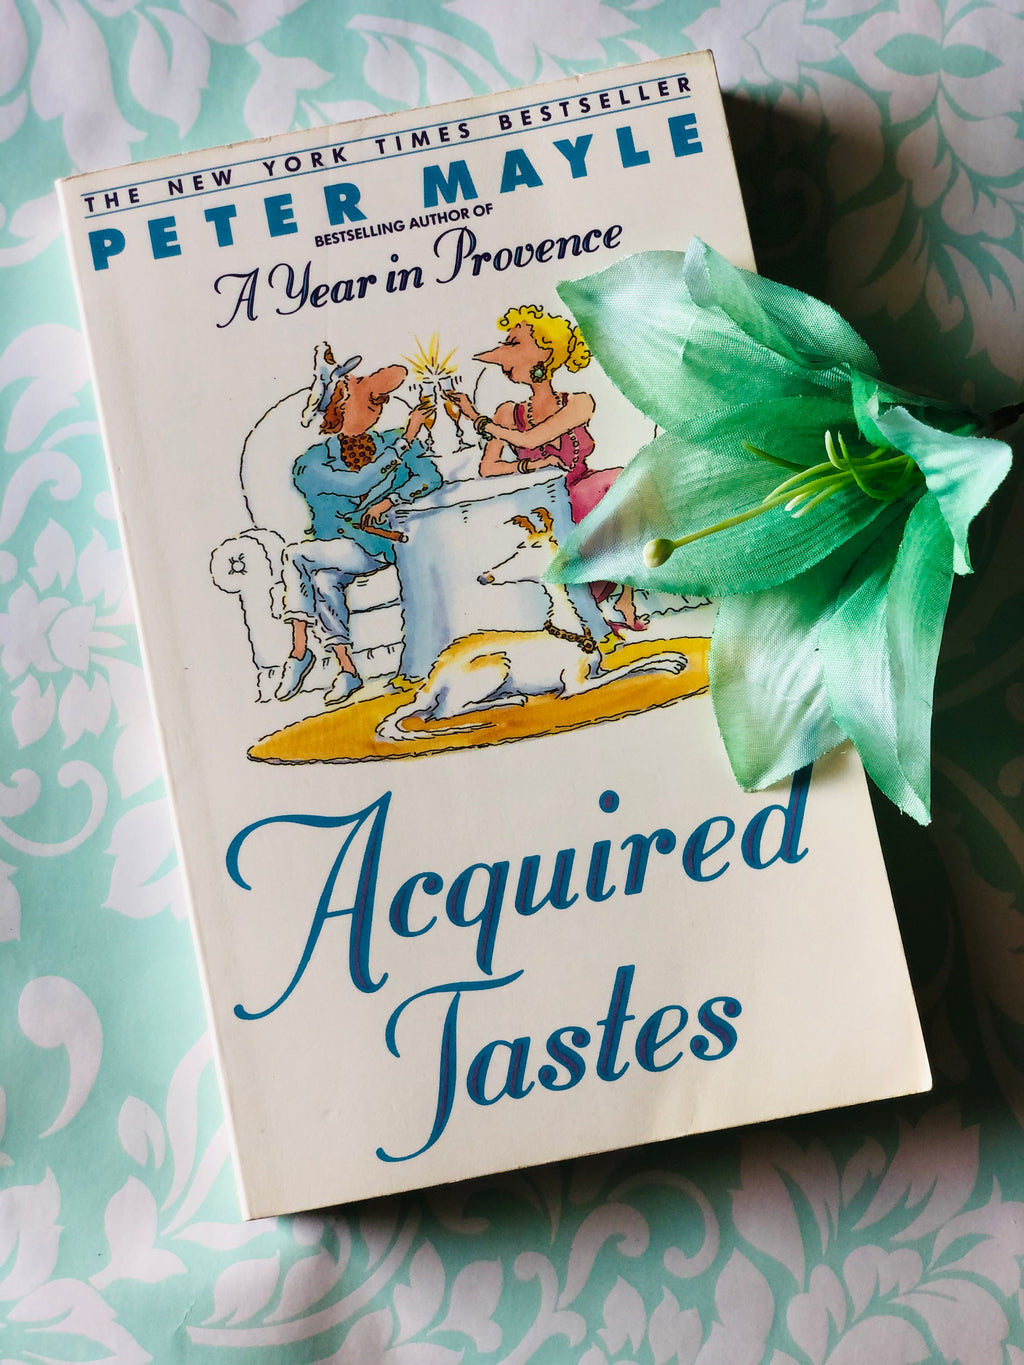 Acquired Tastes- By Peter Mayle